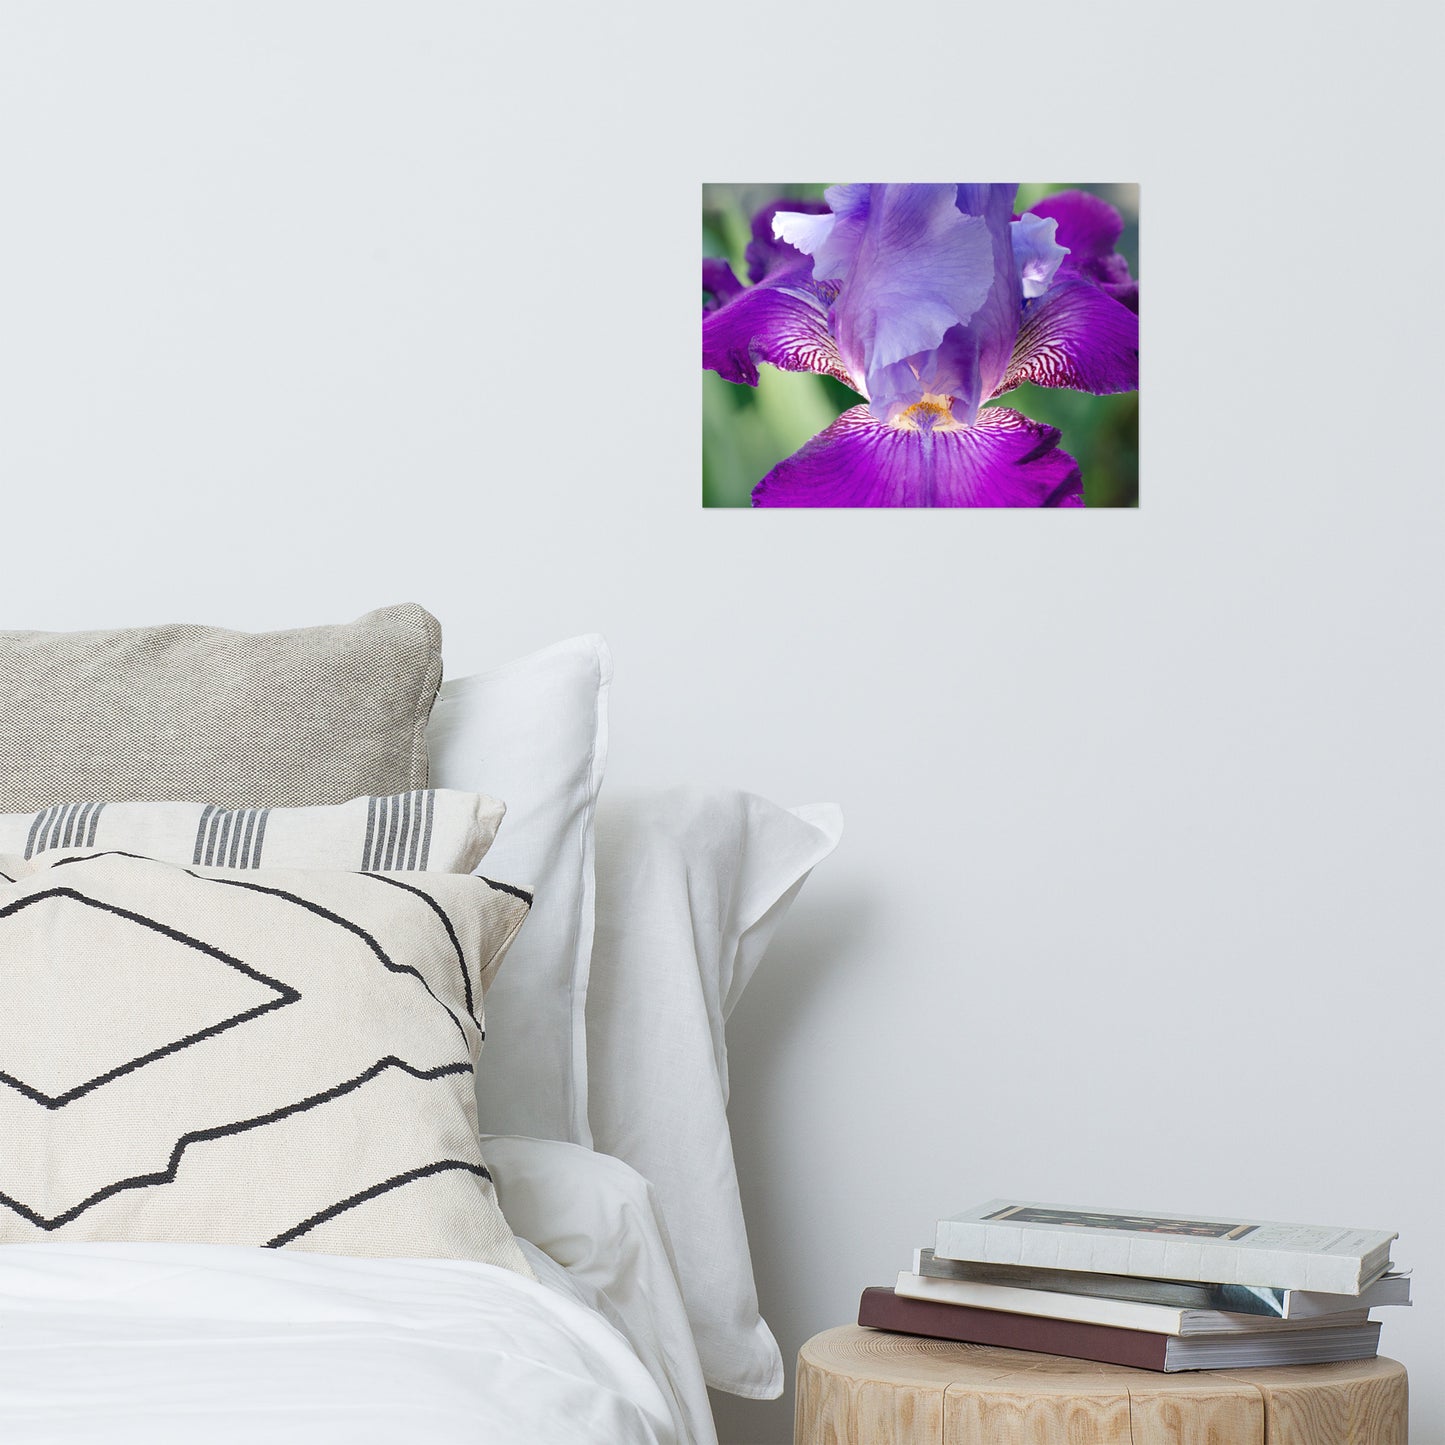 Small Posters For Room: Glowing Iris - Botanical / Floral / Flora / Flowers / Nature Photograph - Loose / Frameable / Unframed / Frameless Wall Art Print - Artwork